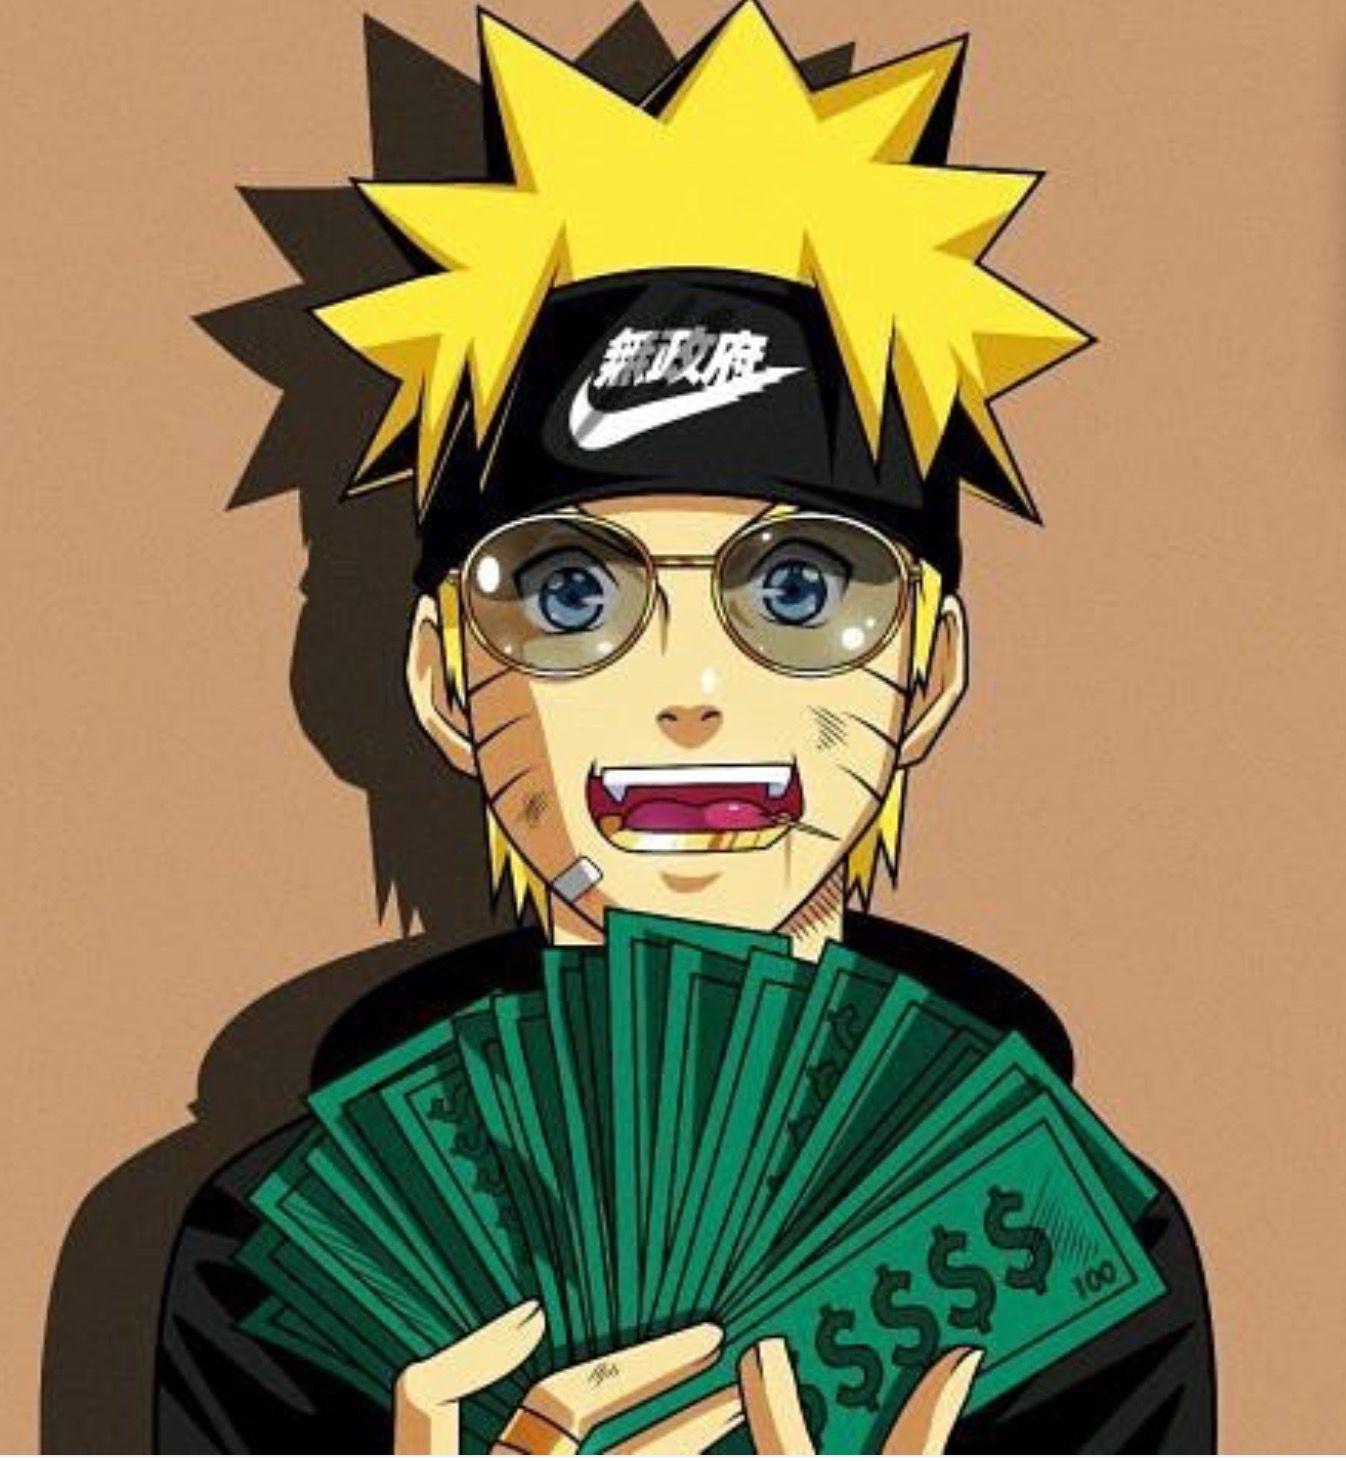 Naruto Swag Wallpapers Top Free Naruto Swag Backgrounds Wallpaperaccess Image result for pain naruto gucci wallpaper. naruto swag wallpapers top free